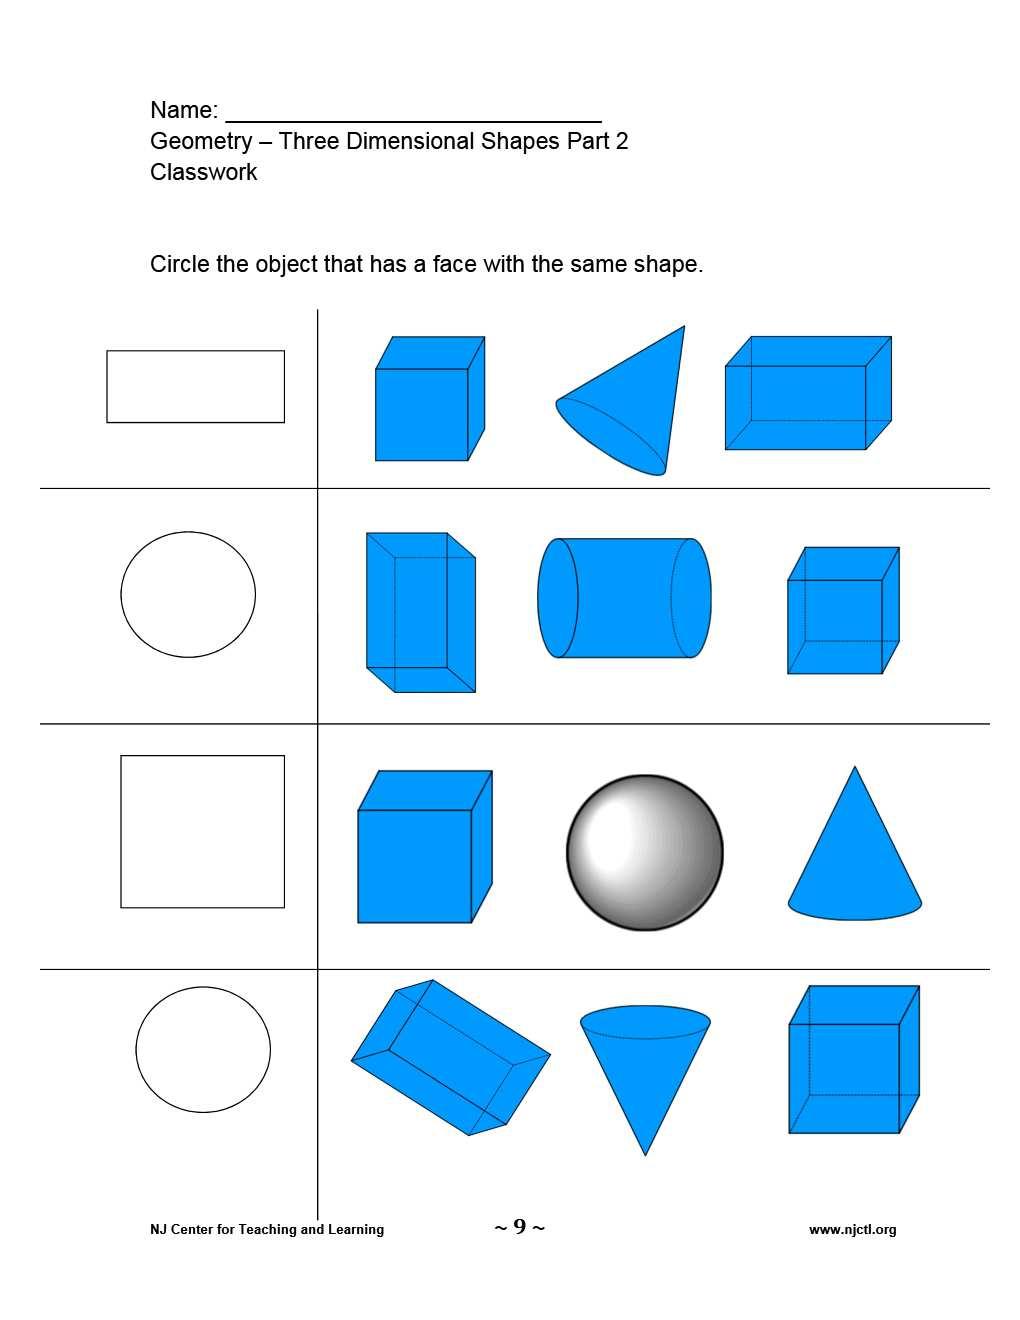 Slide 87 () / 117 23 How many faces does this shape have? Slide 88 / 117 24 How many corners does this shape have? 6 Slide 88 () / 117 24 How many corners does this shape have?